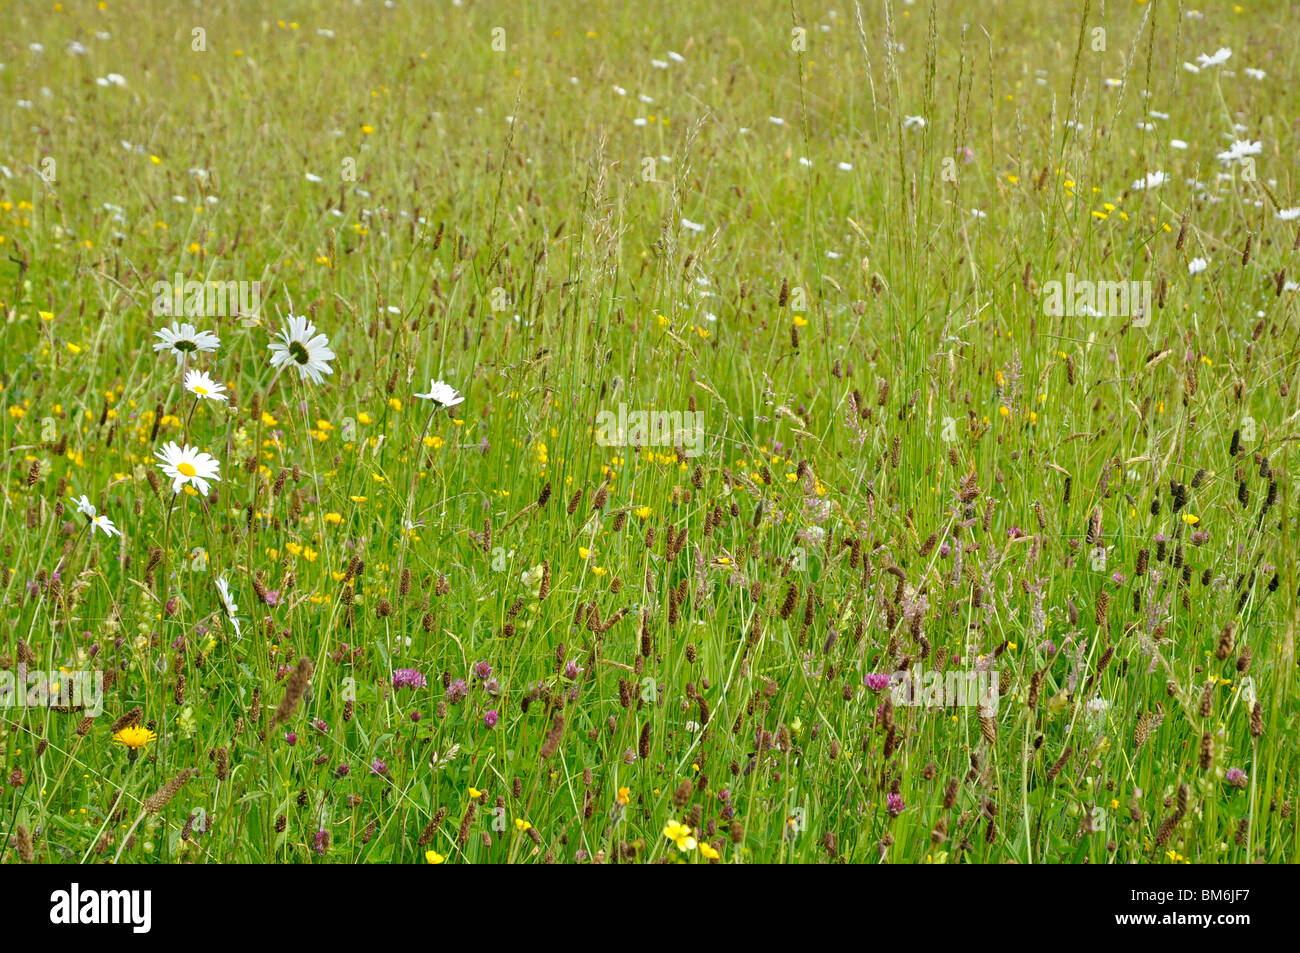 English Meadow with flowers and grasses Stock Photo